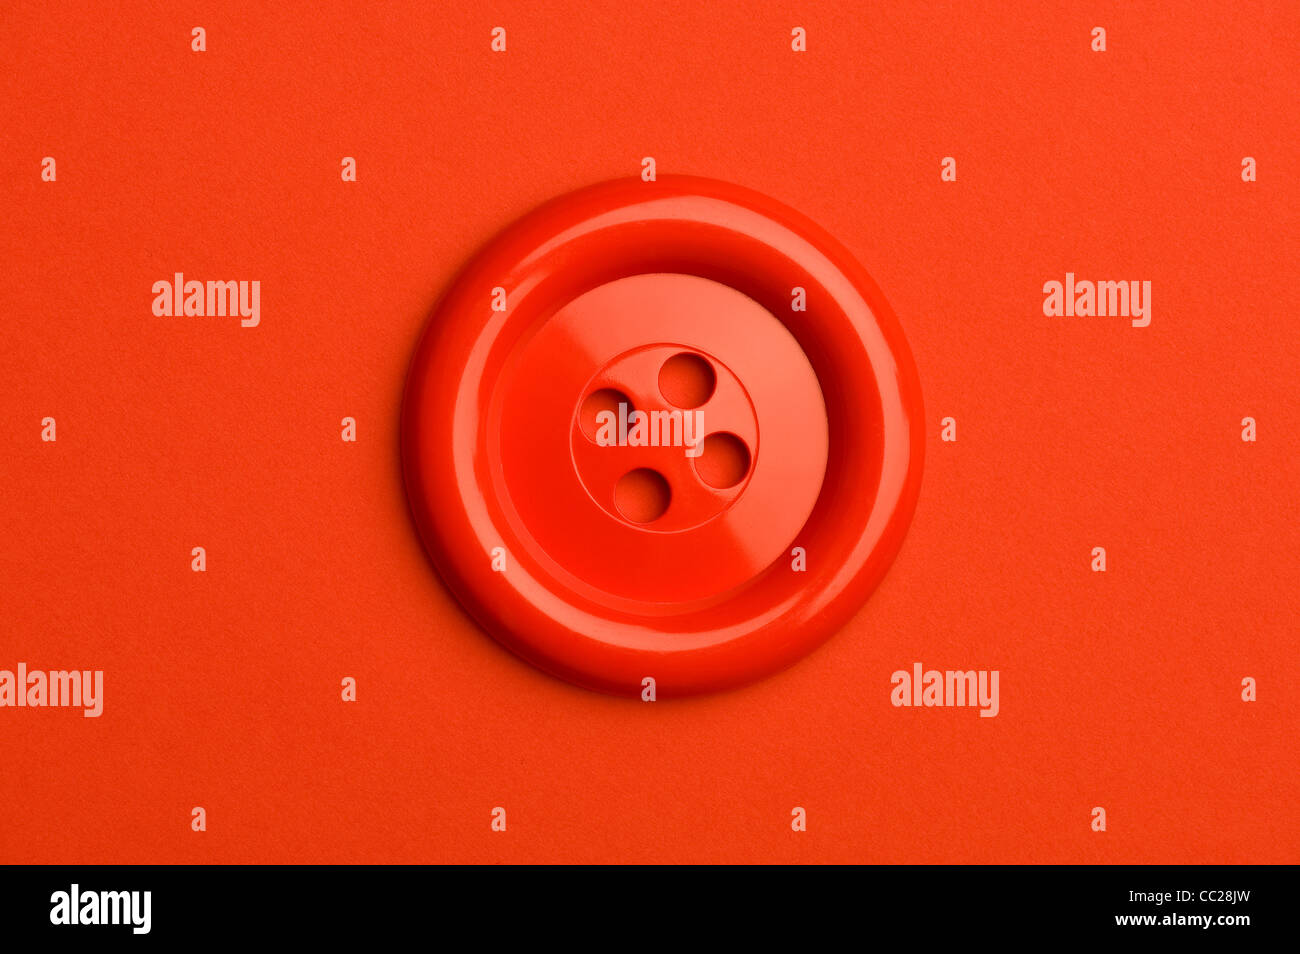 A red button on a red background Stock Photo